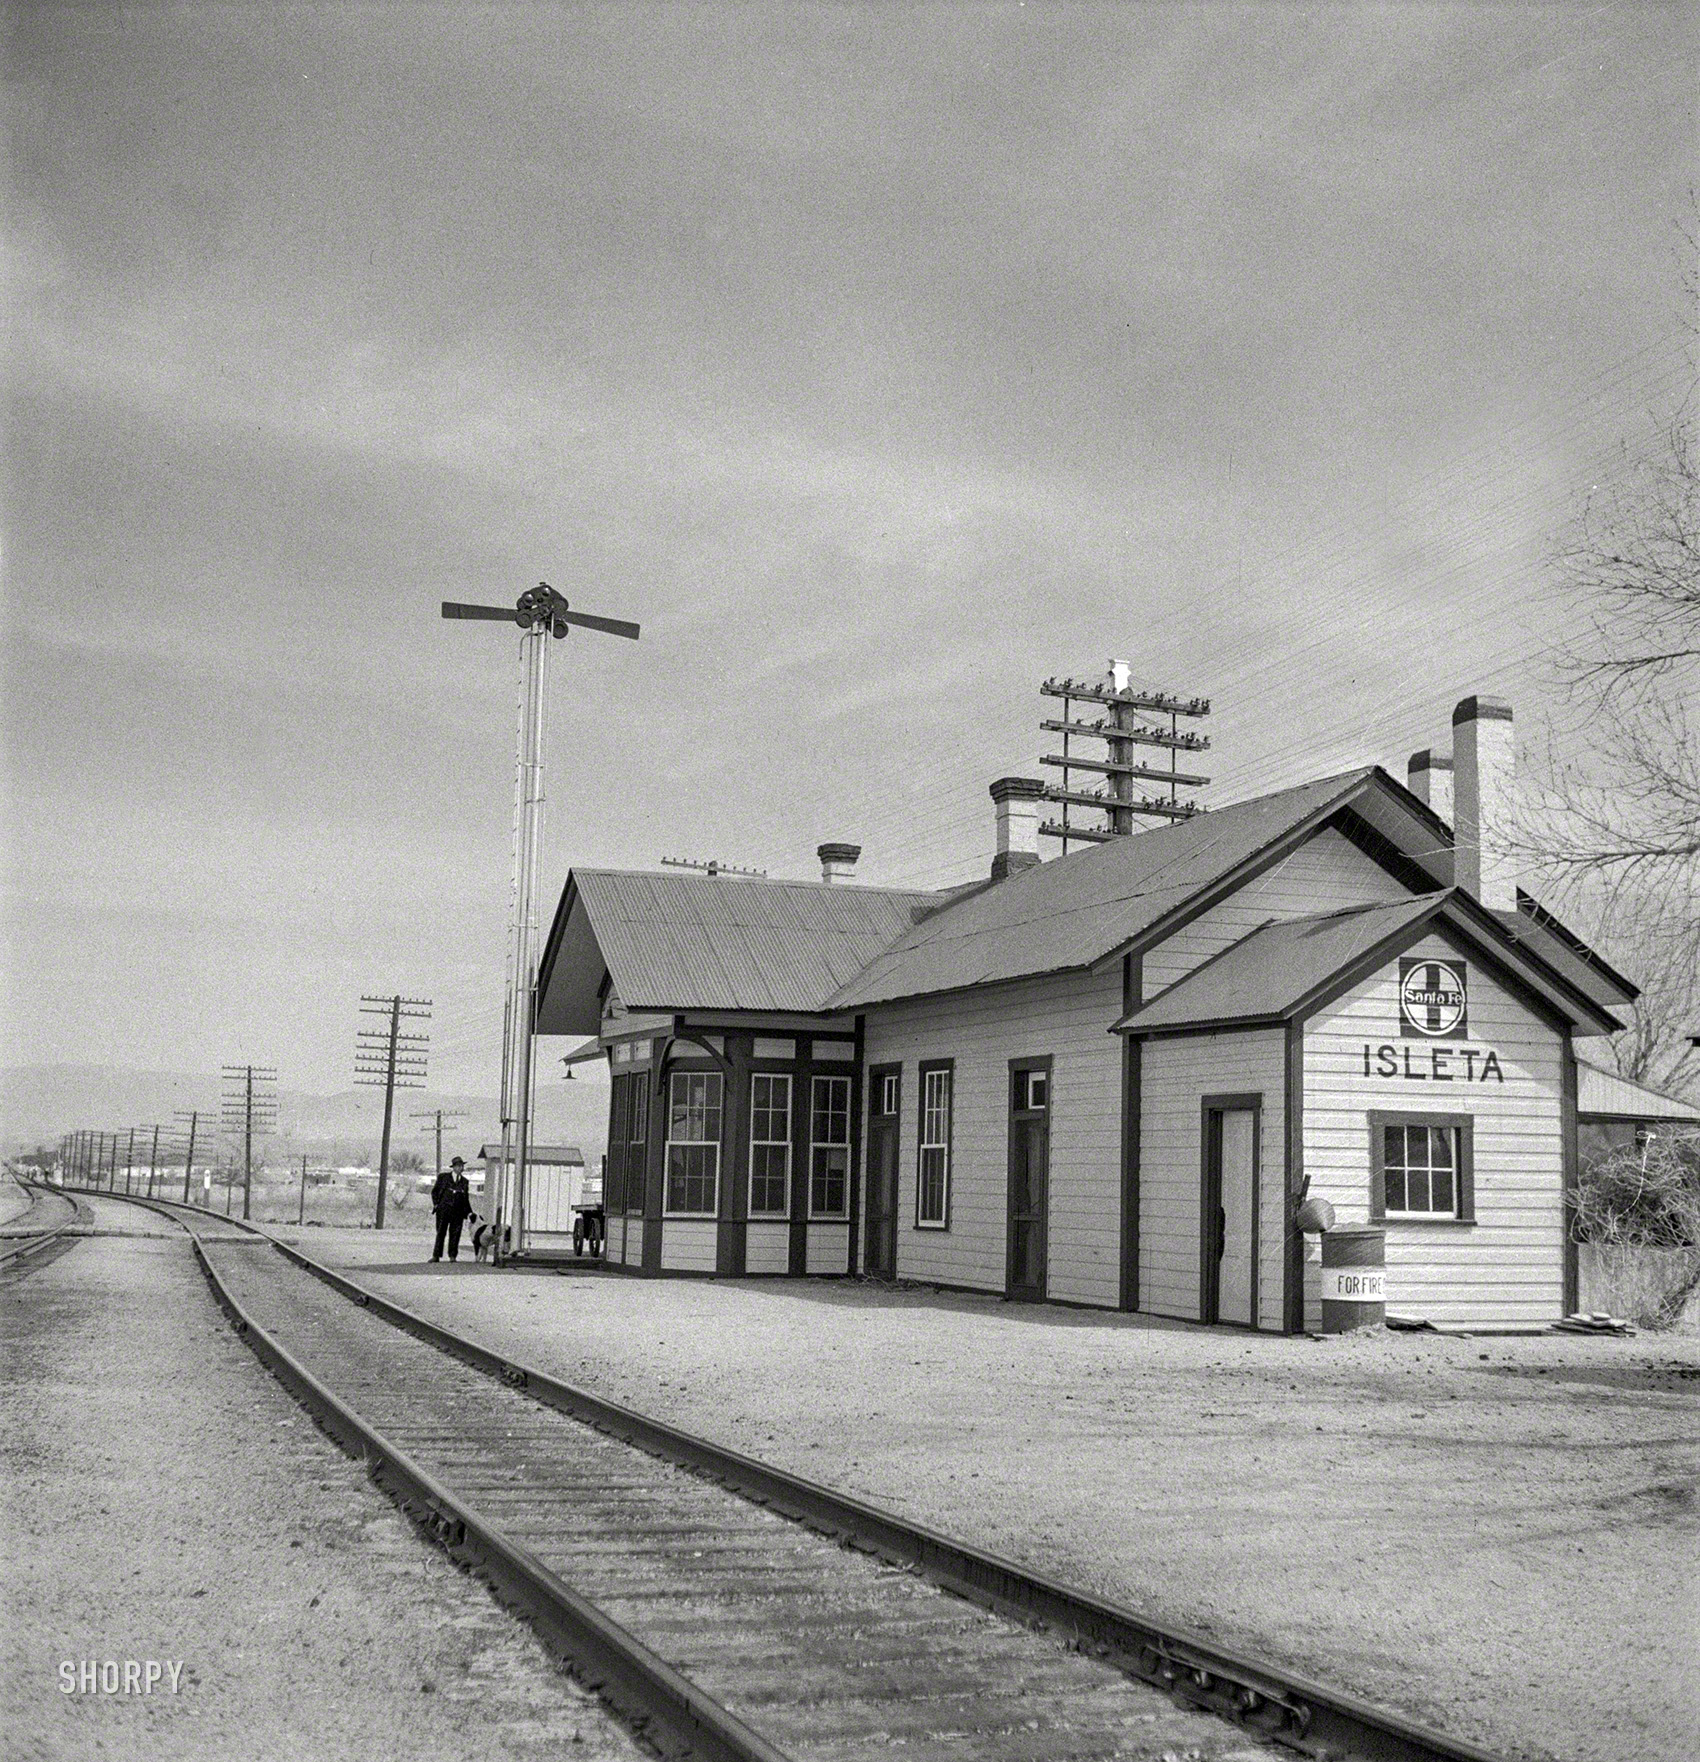 March 1943. "Isleta, New Mexico. The Santa Fe depot. Horizontal arms on pole indicate a 'red beard,' that is a message is to be picked up by the train crew." Photo by Jack Delano for the Office of War Information. View full size.